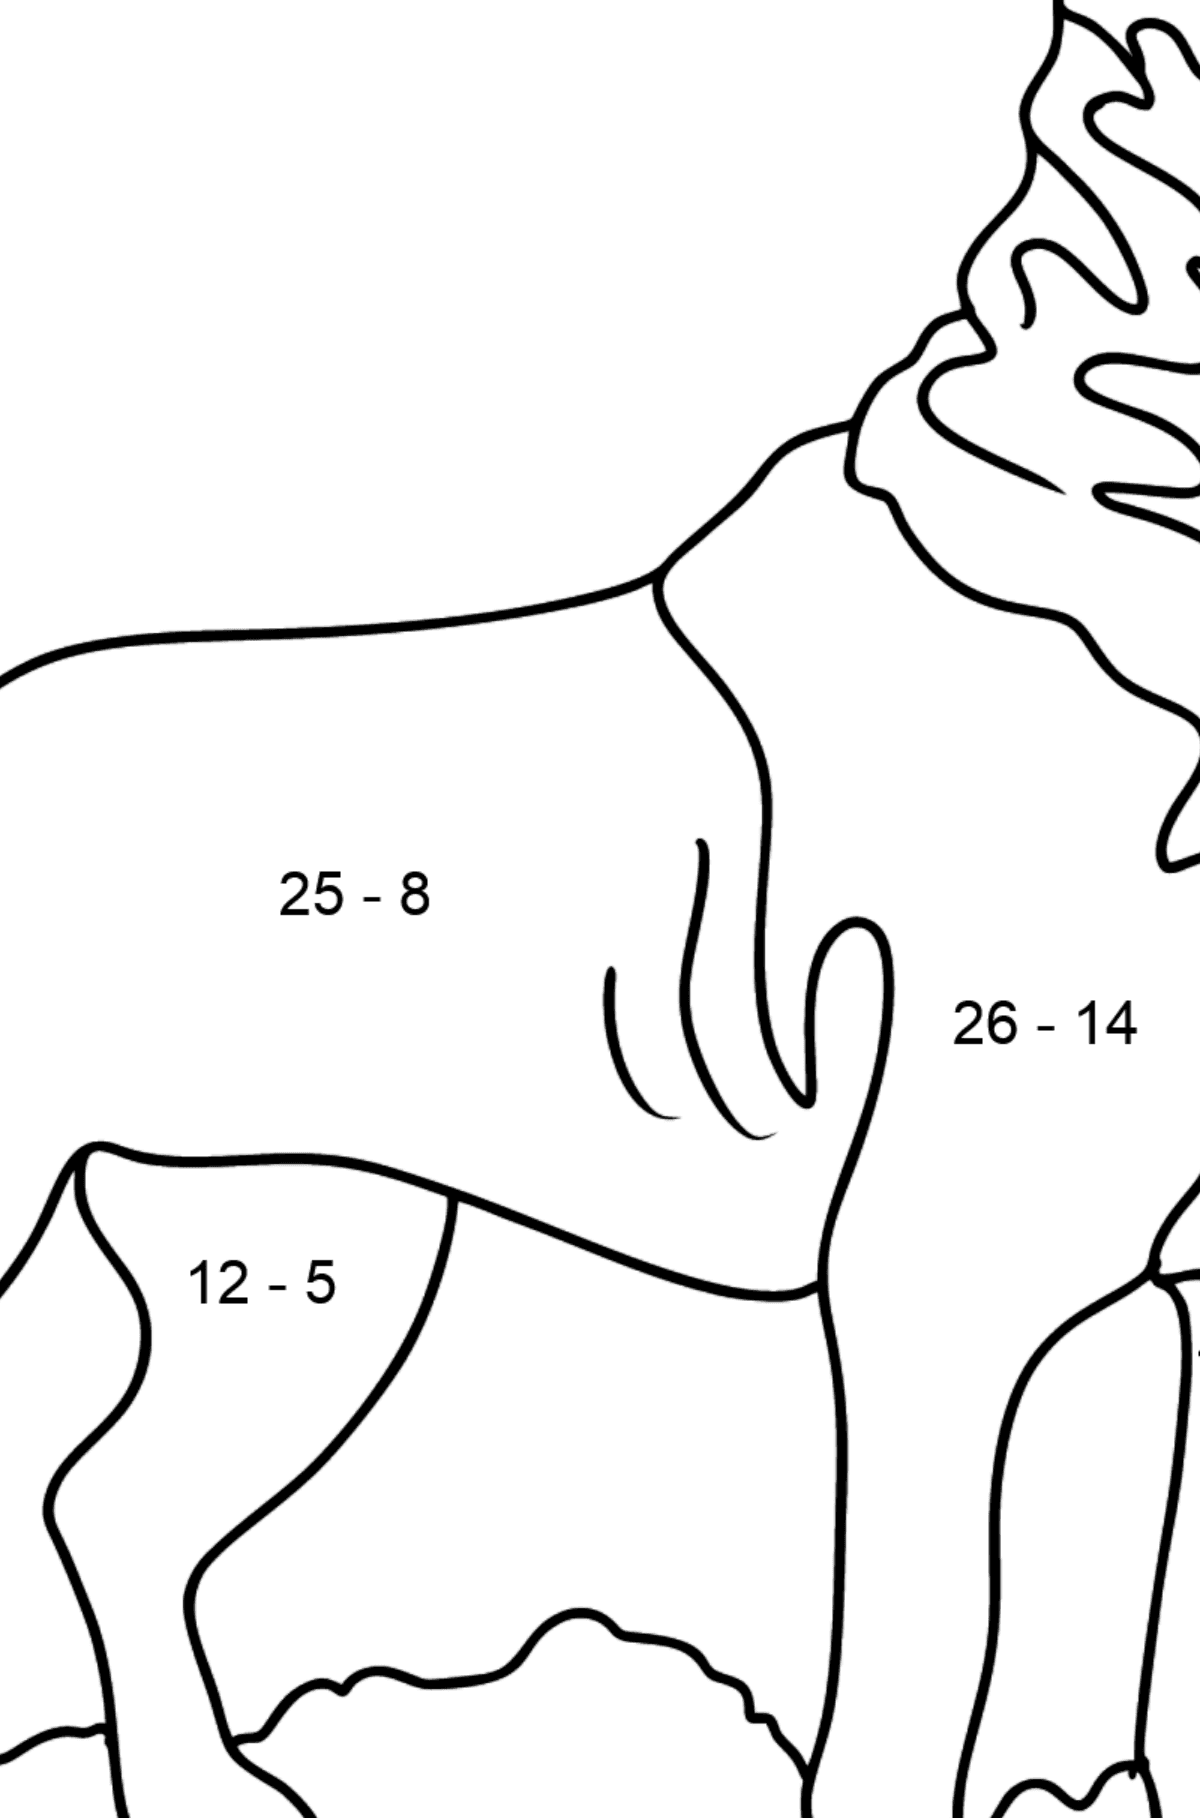 Rottweiler coloring page - Math Coloring - Subtraction for Kids